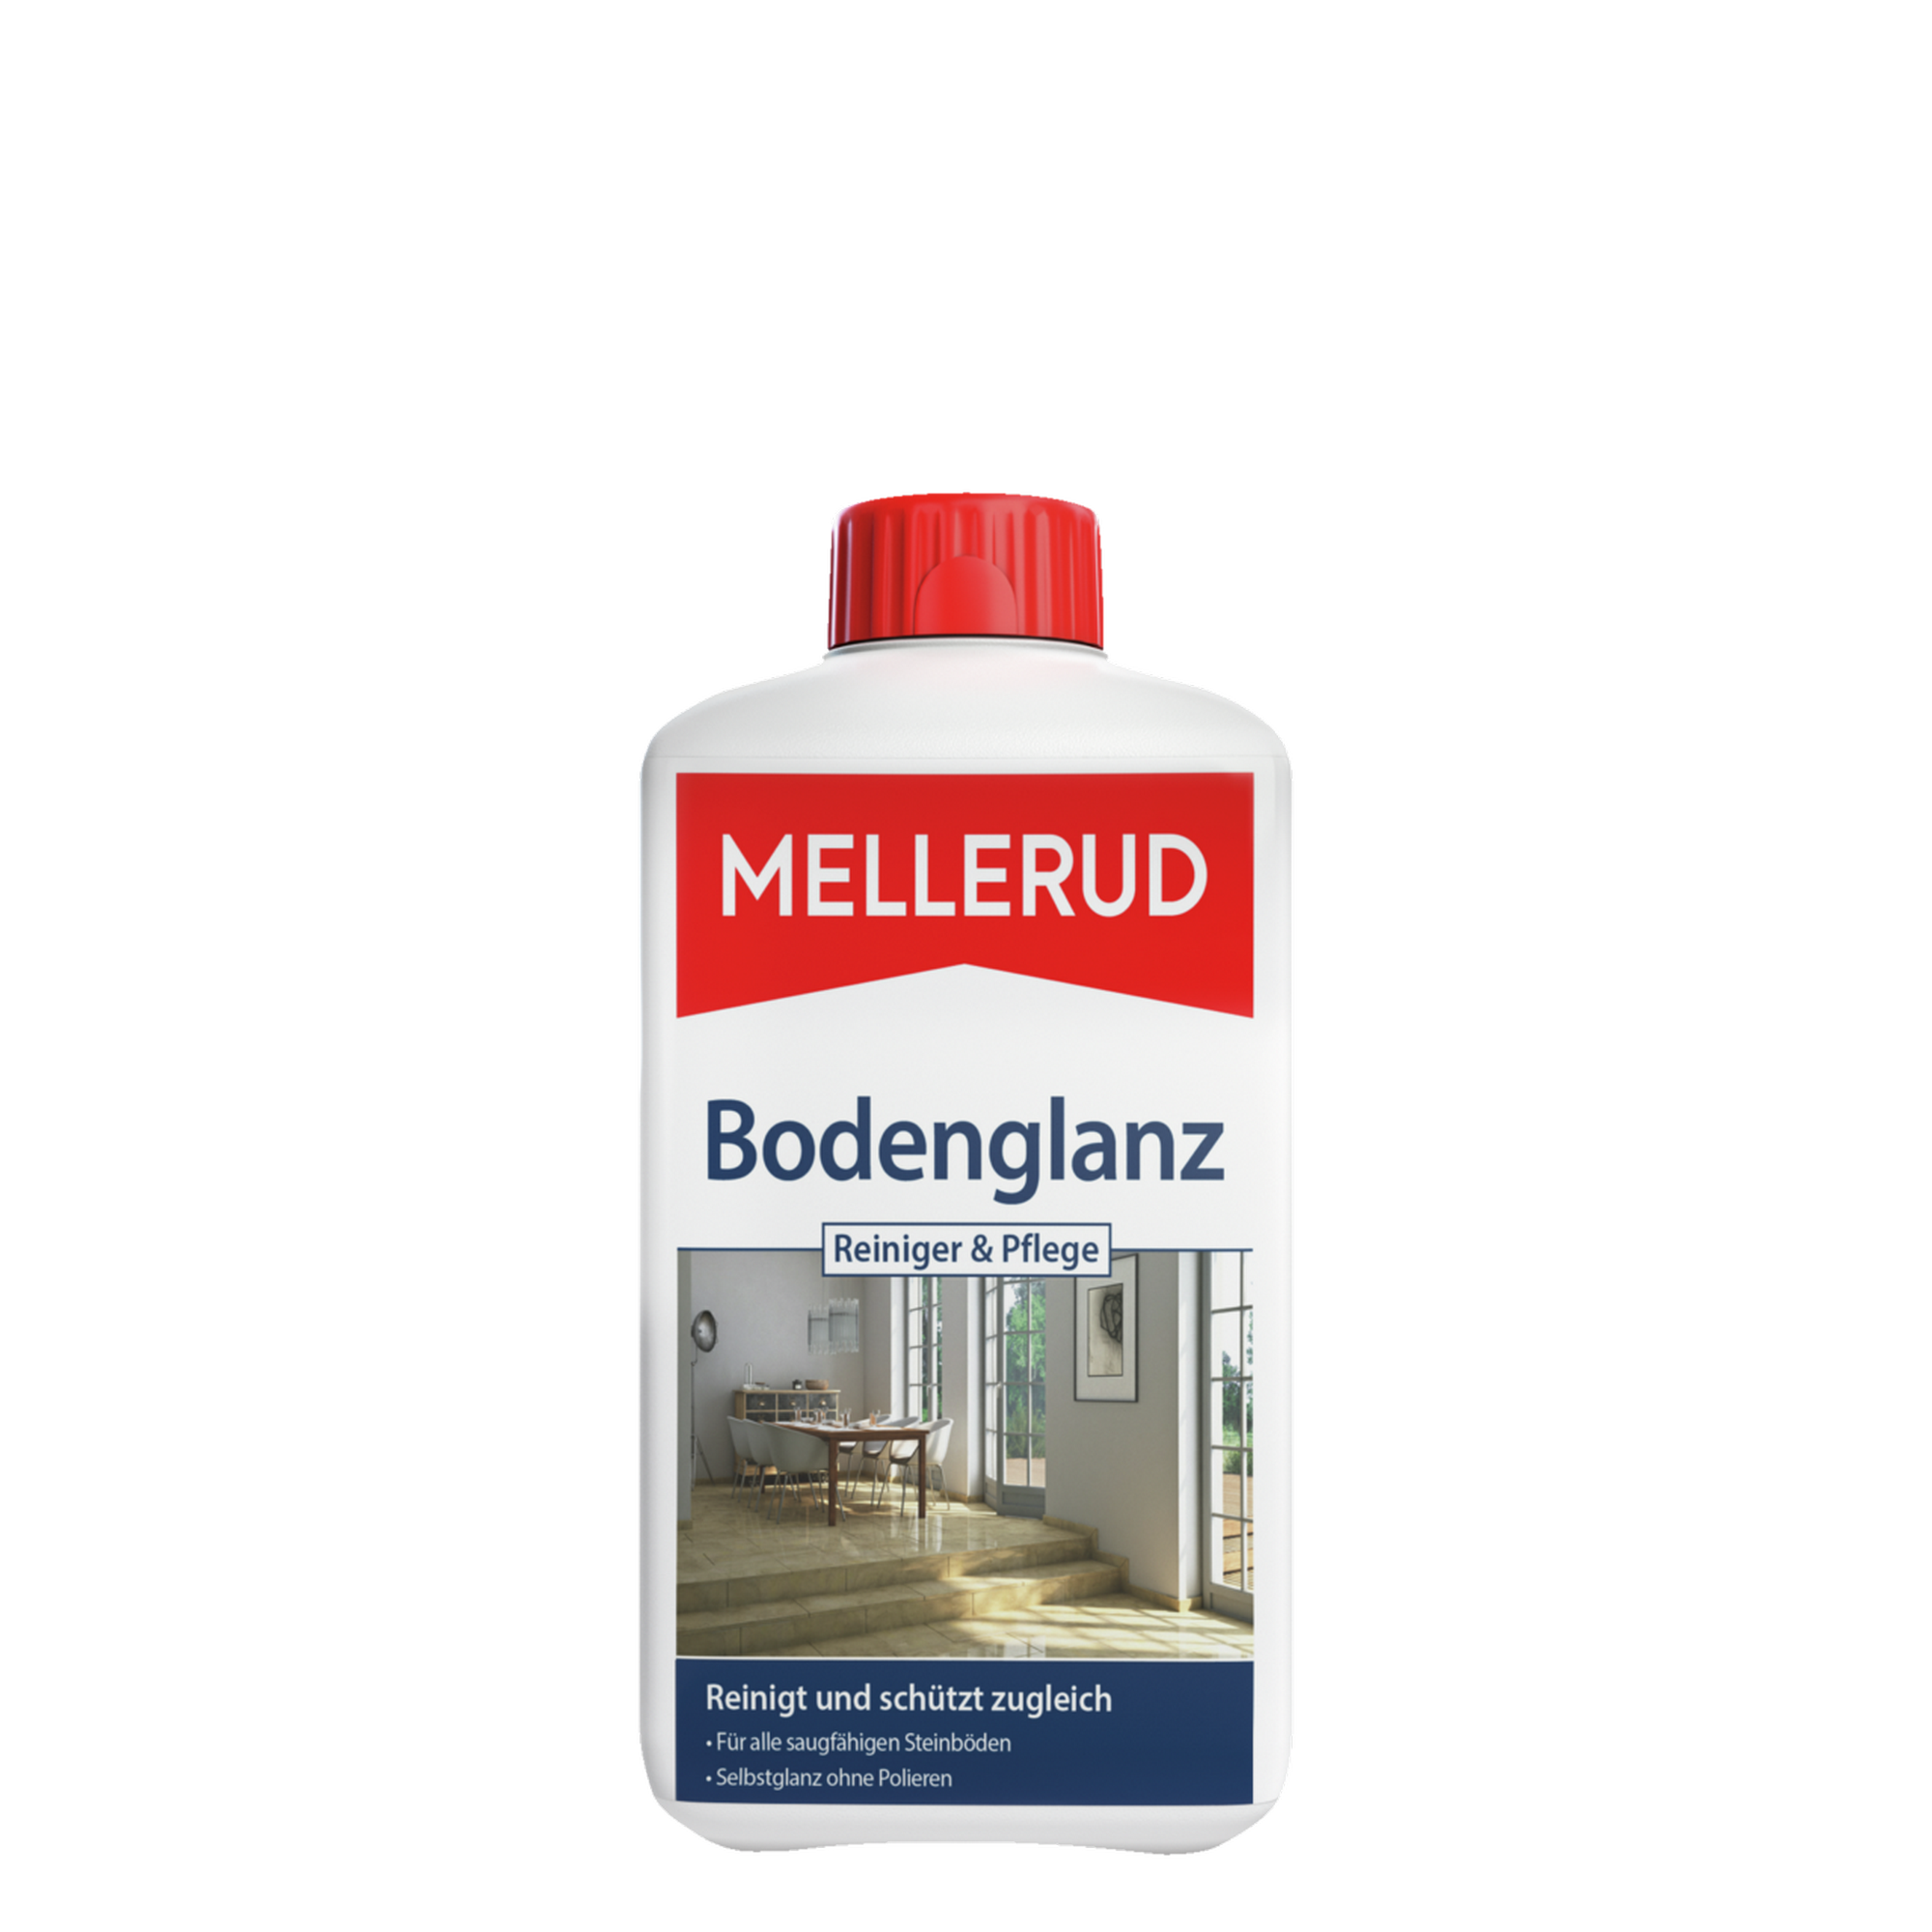 Bodenglanz Reiniger & Pflege 1,0 l + product picture